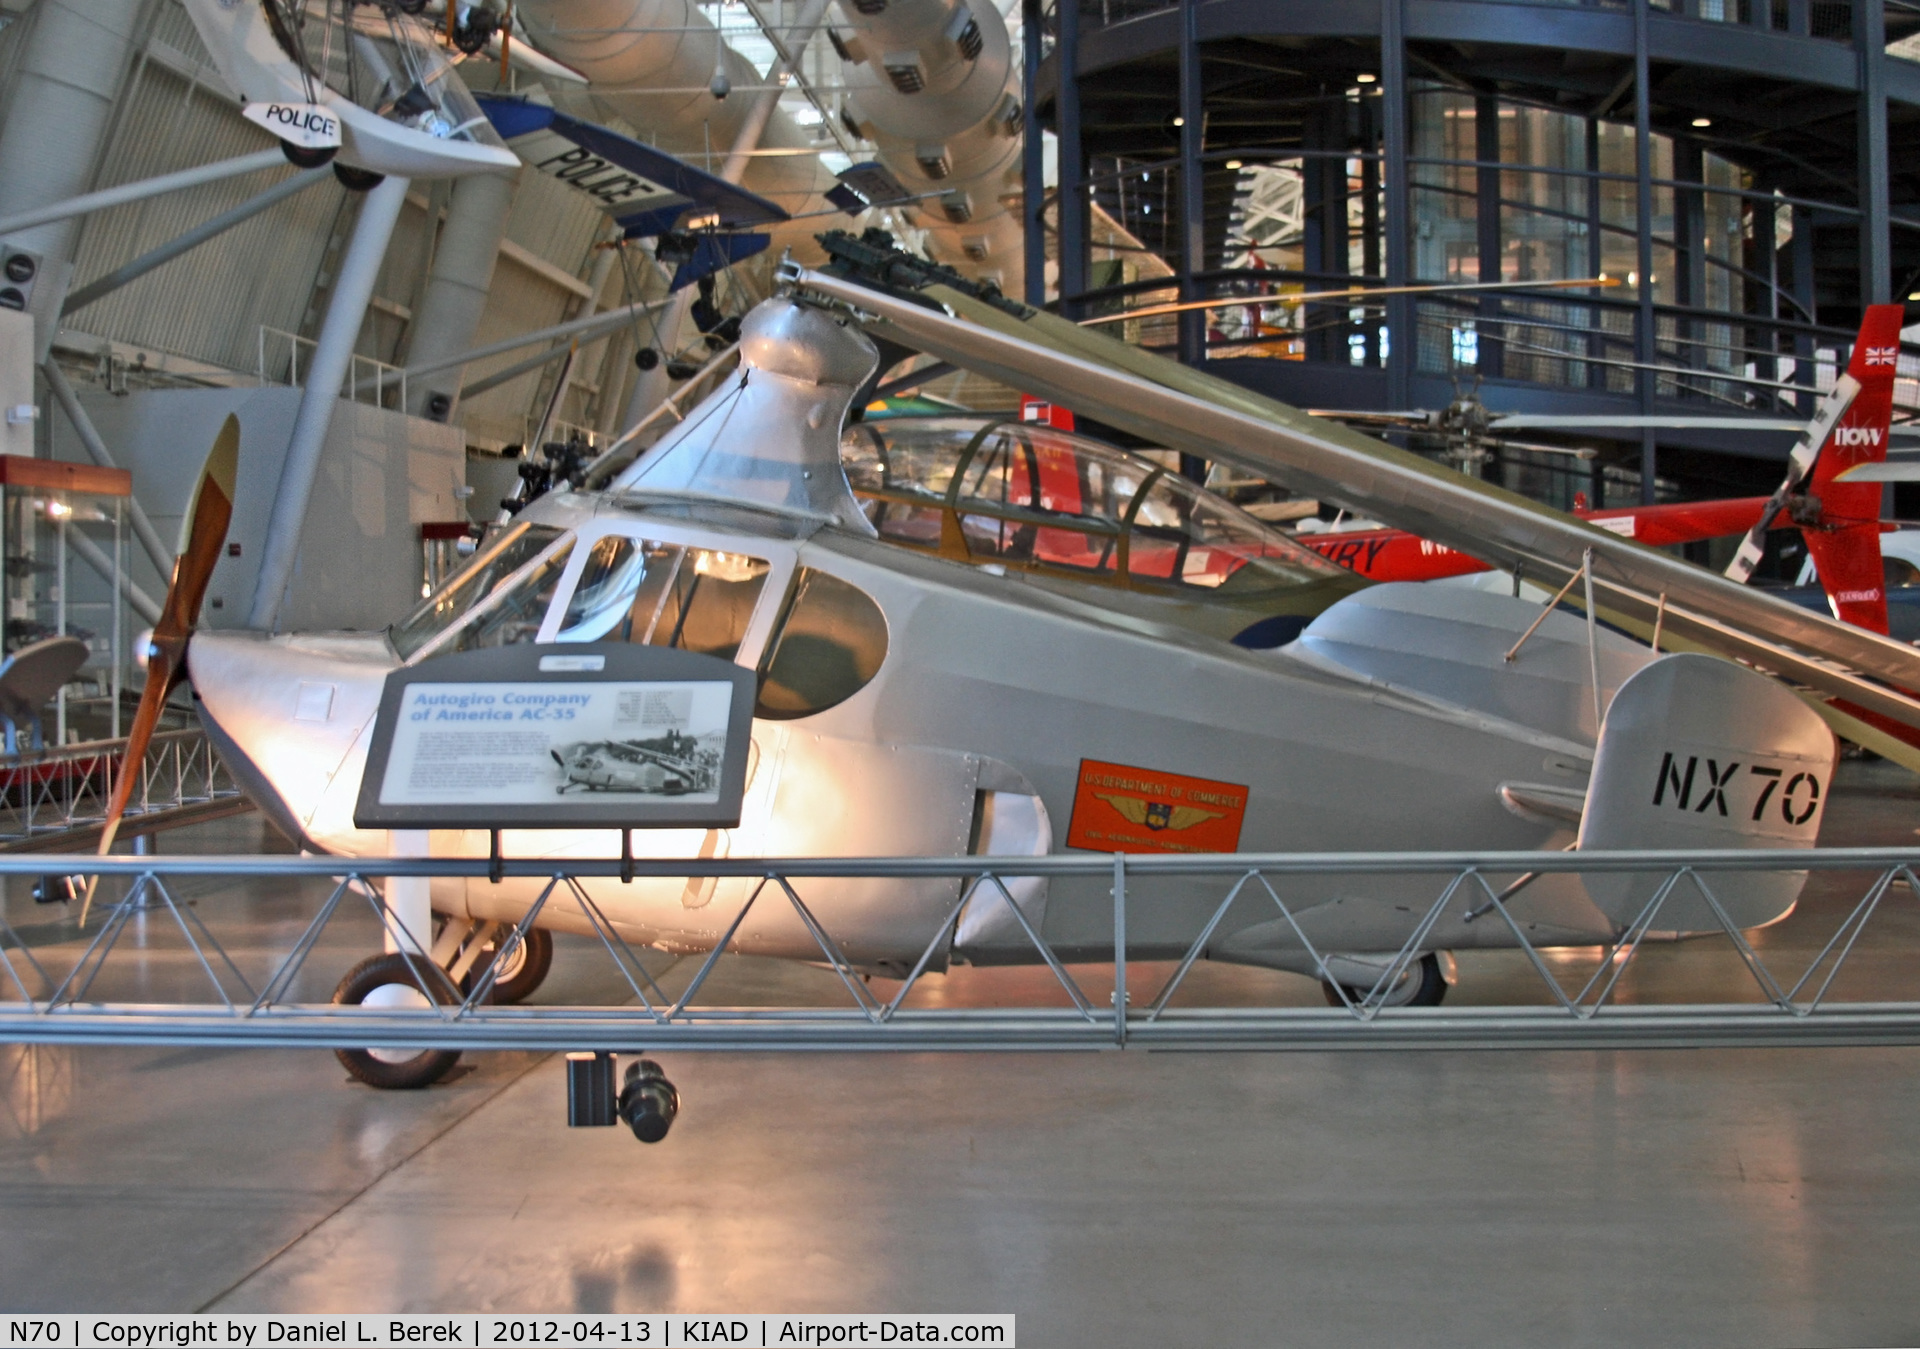 N70, 1936 Autogiro Company of America AC-35, In 1936, the U.S. government sponsored and underwrote an effort to provide middle-class people with an affordable flying machine.